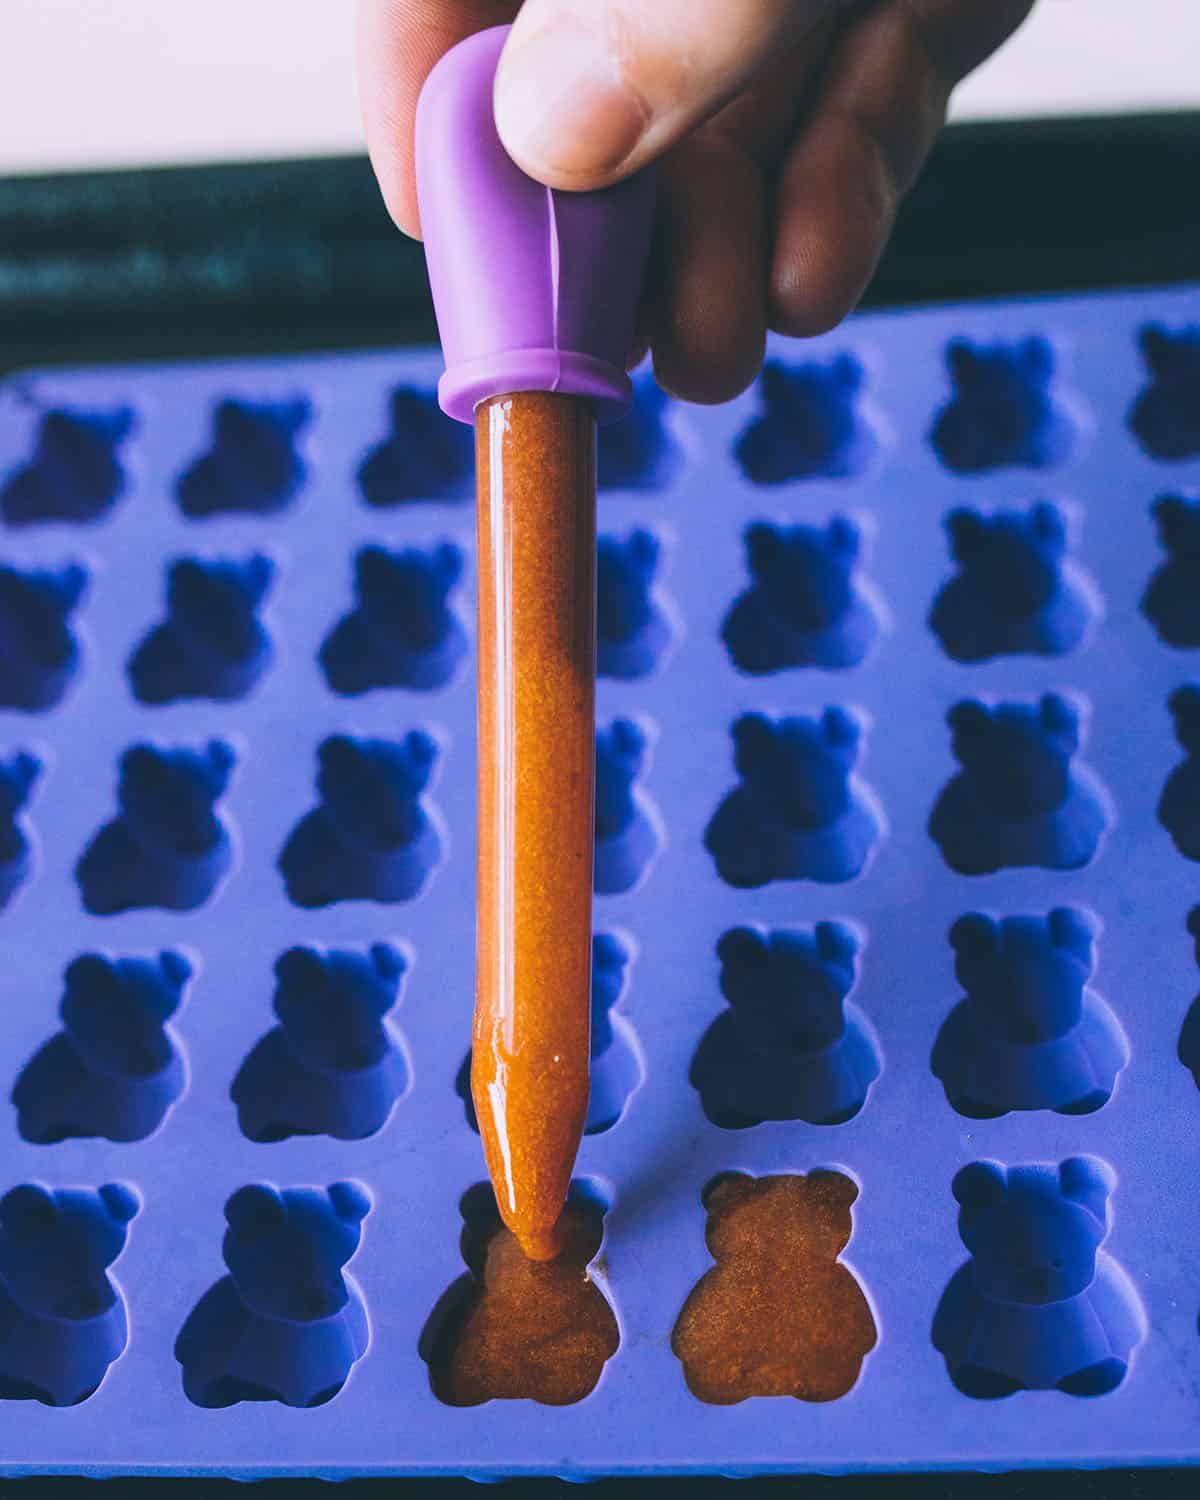 Gummy bear molds with a dropper pouring the liquid into each mold.